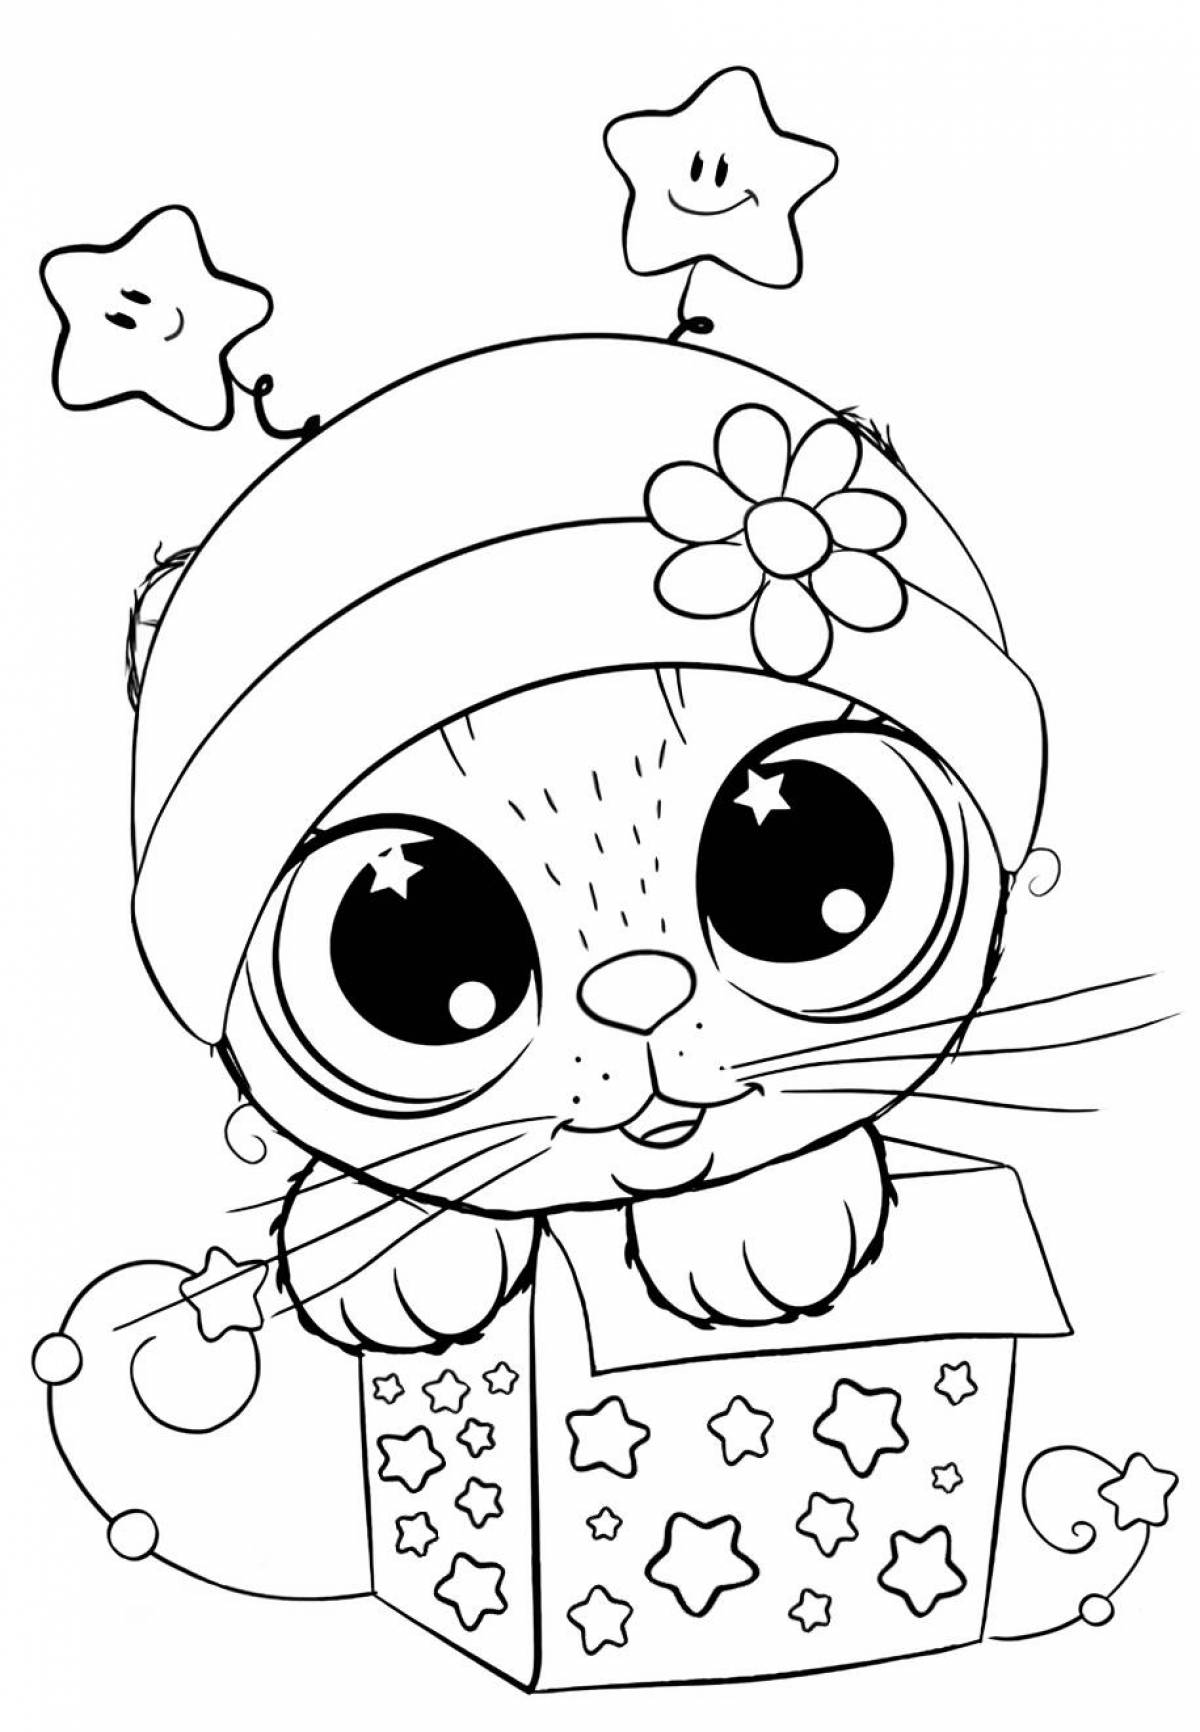 Fun coloring book is the cutest in the world